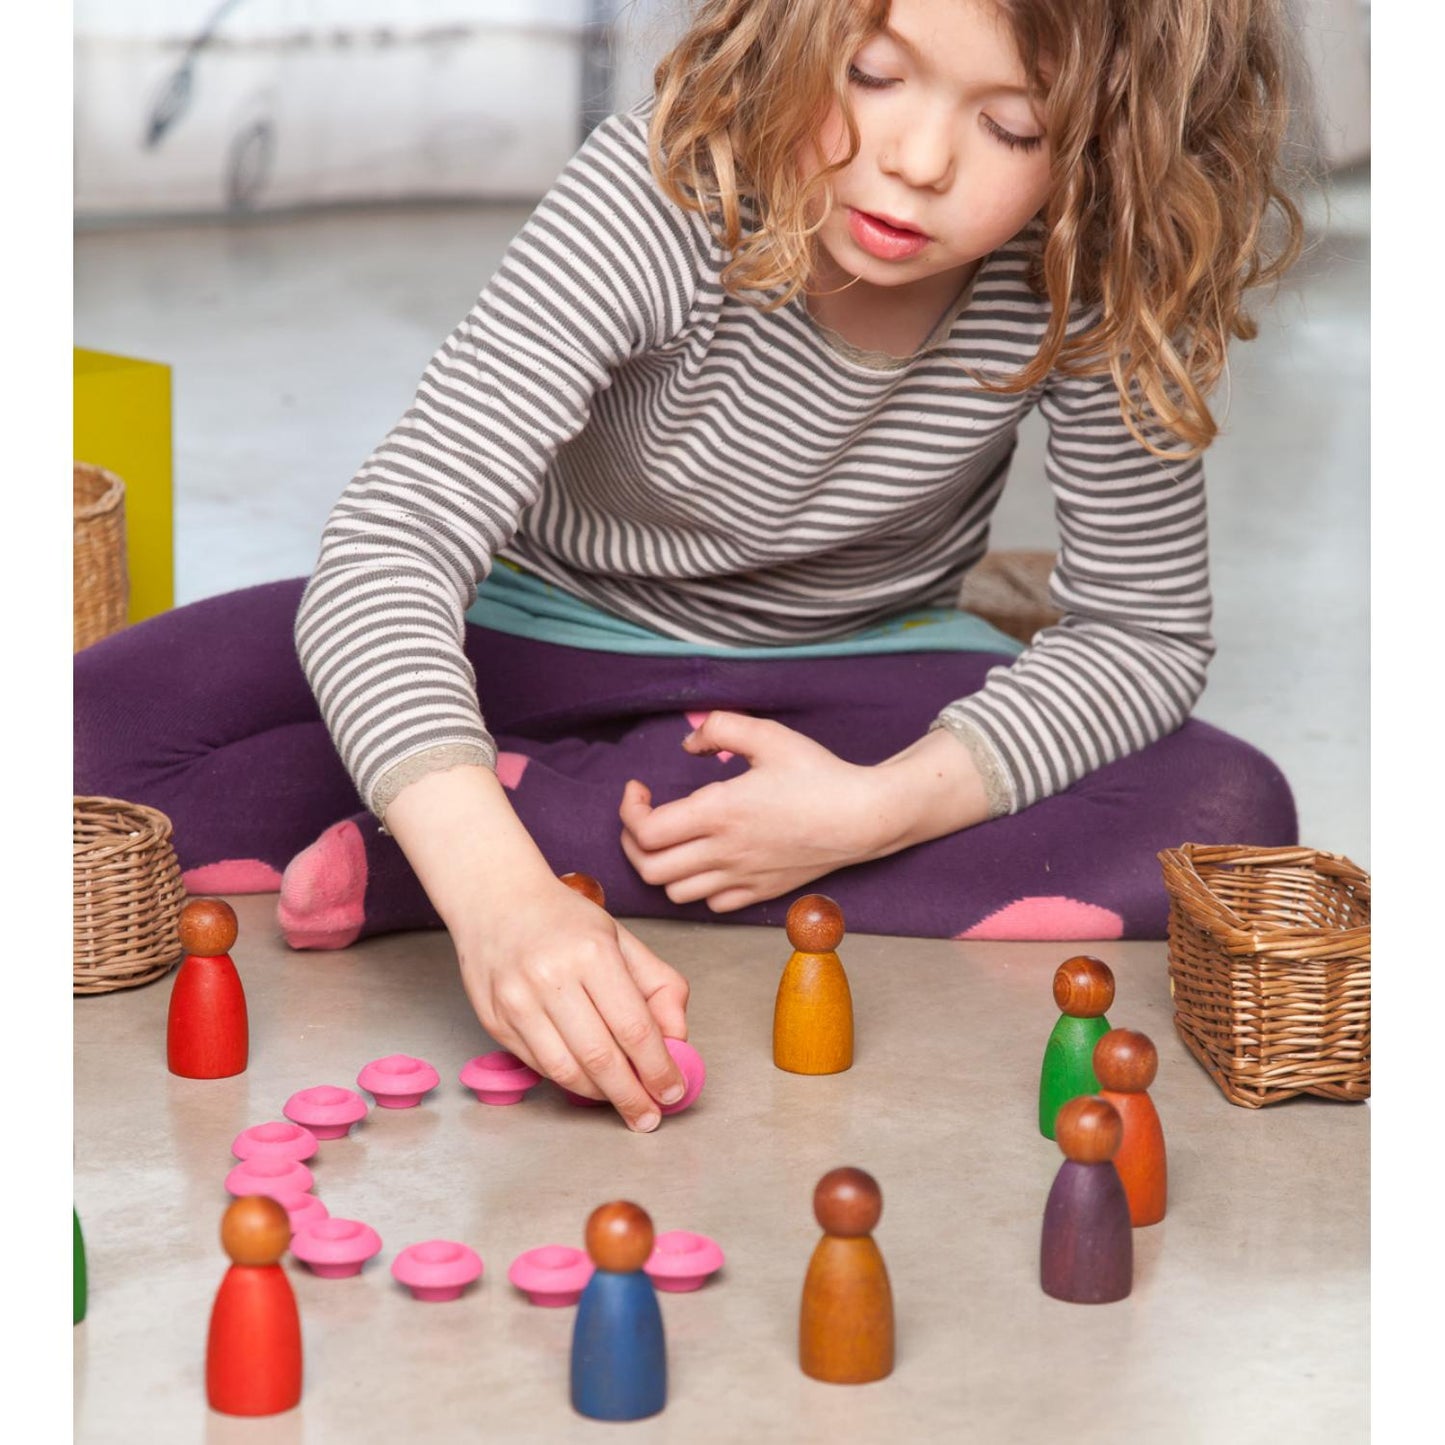 Grapat 3 Dark Wood Nins Stained In Cold Colours | Wooden Toys for Kids | Open-Ended Play Set | Lifestyle: Girl Playing with Dark Wood Nins | BeoVERDE.ie